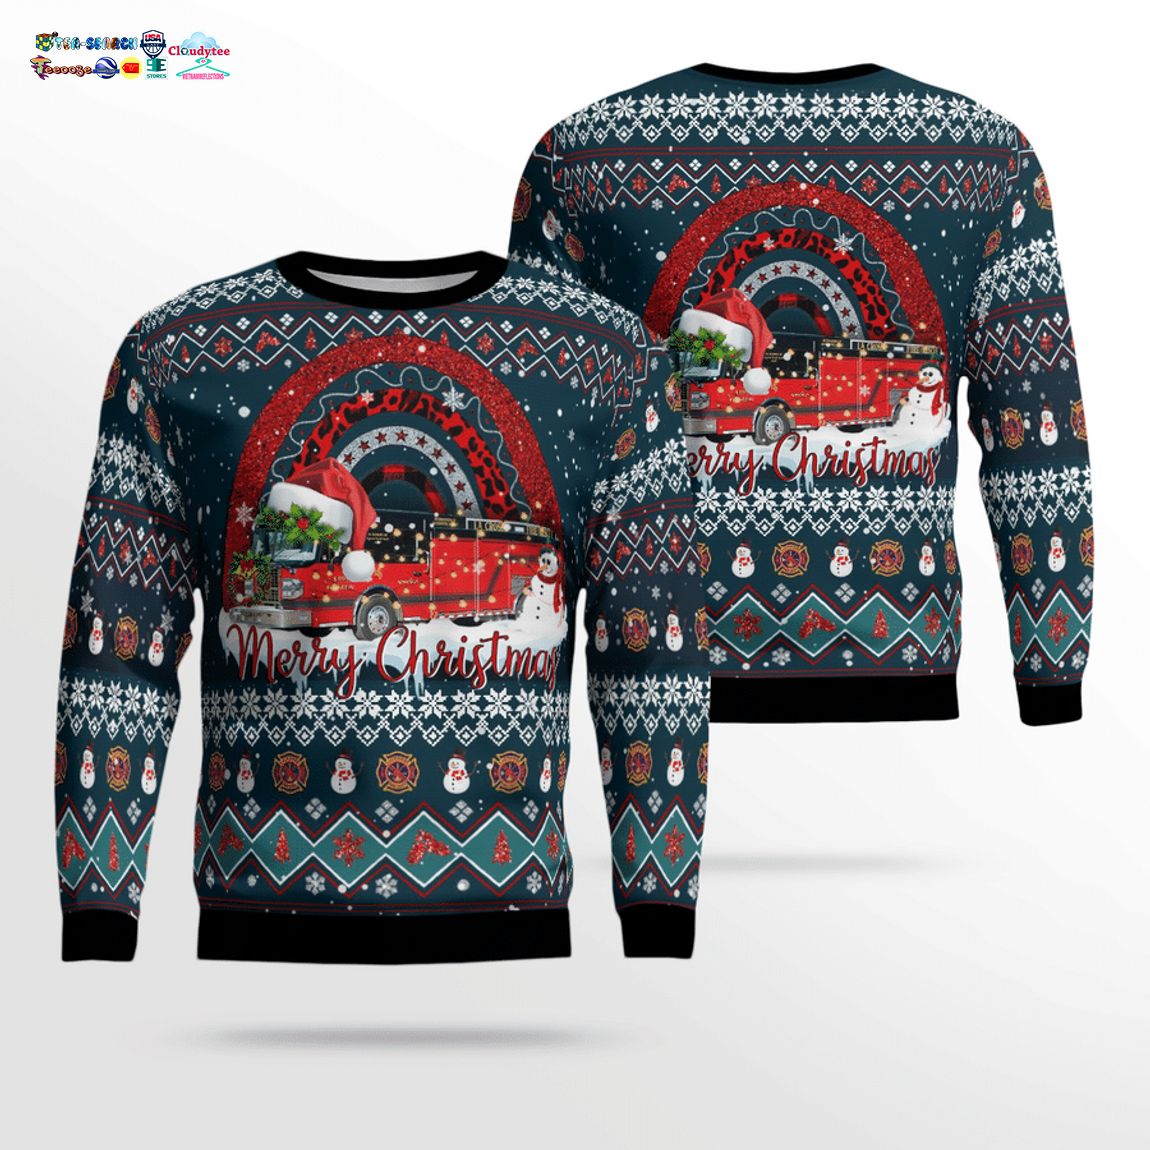 City of La Crosse Fire Department 3D Christmas Sweater - Wow! This is gracious